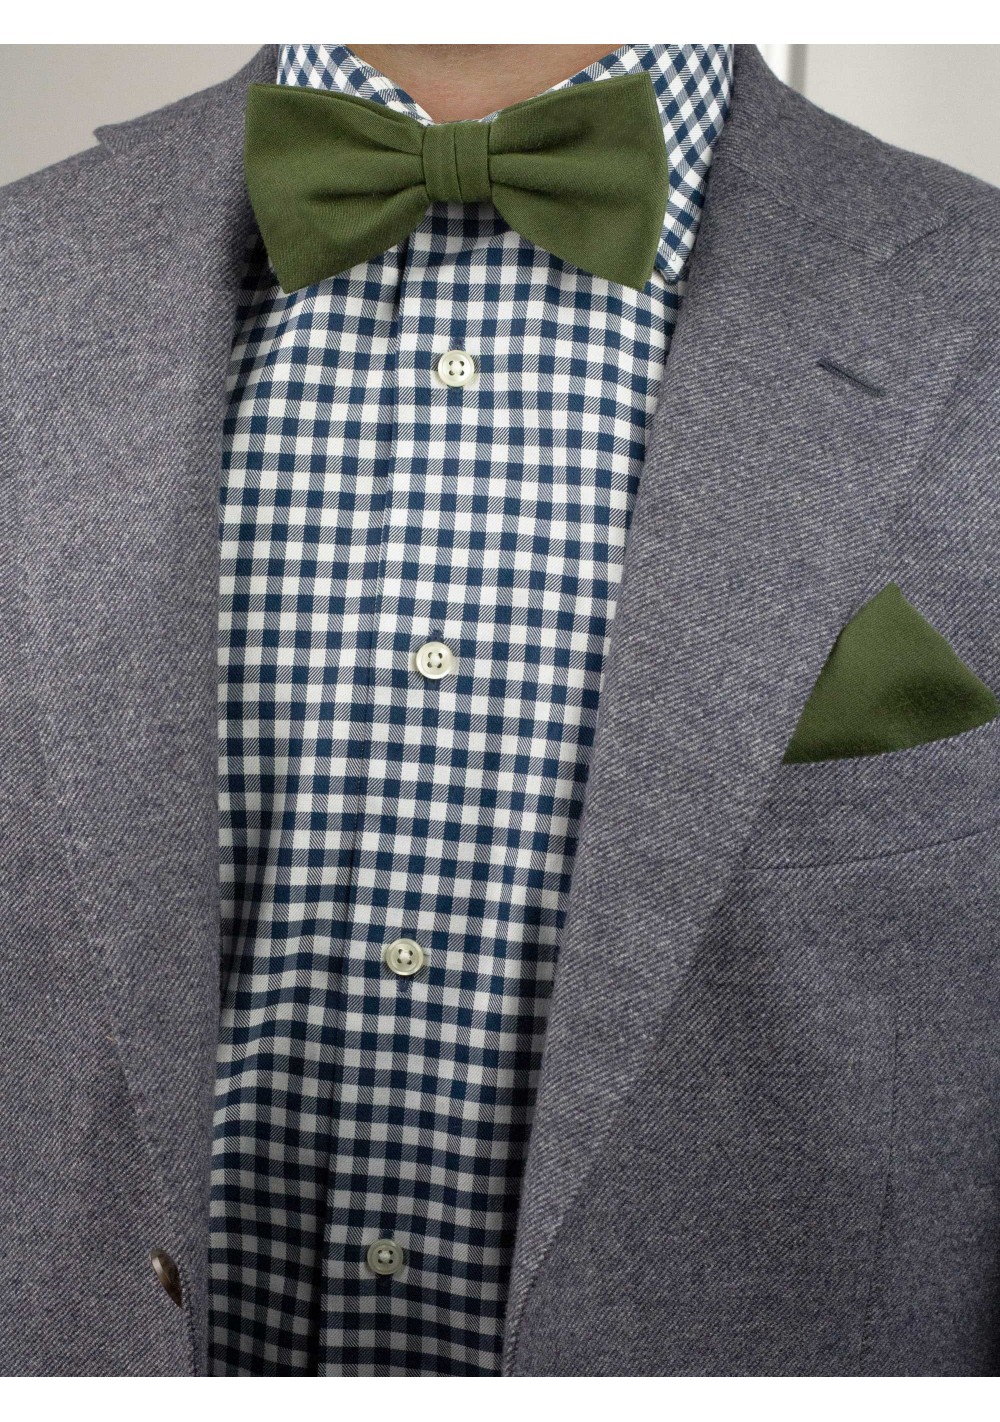 Bowtie Hanky Combo in Olive | Matte Olive Green Bow Tie and Pocket ...